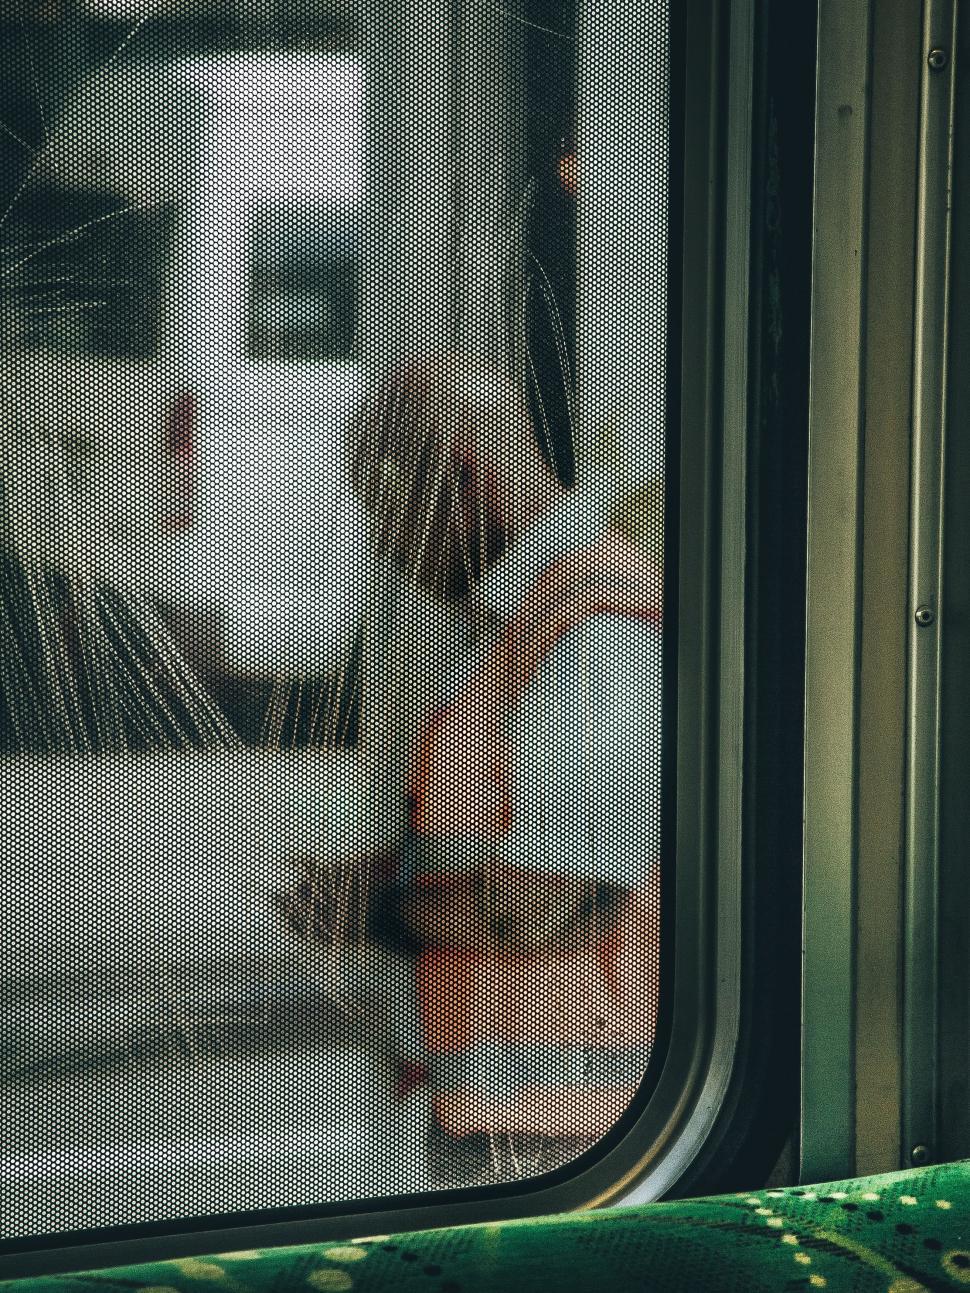 Free Image of Person Looking Out the Window of a Bus 